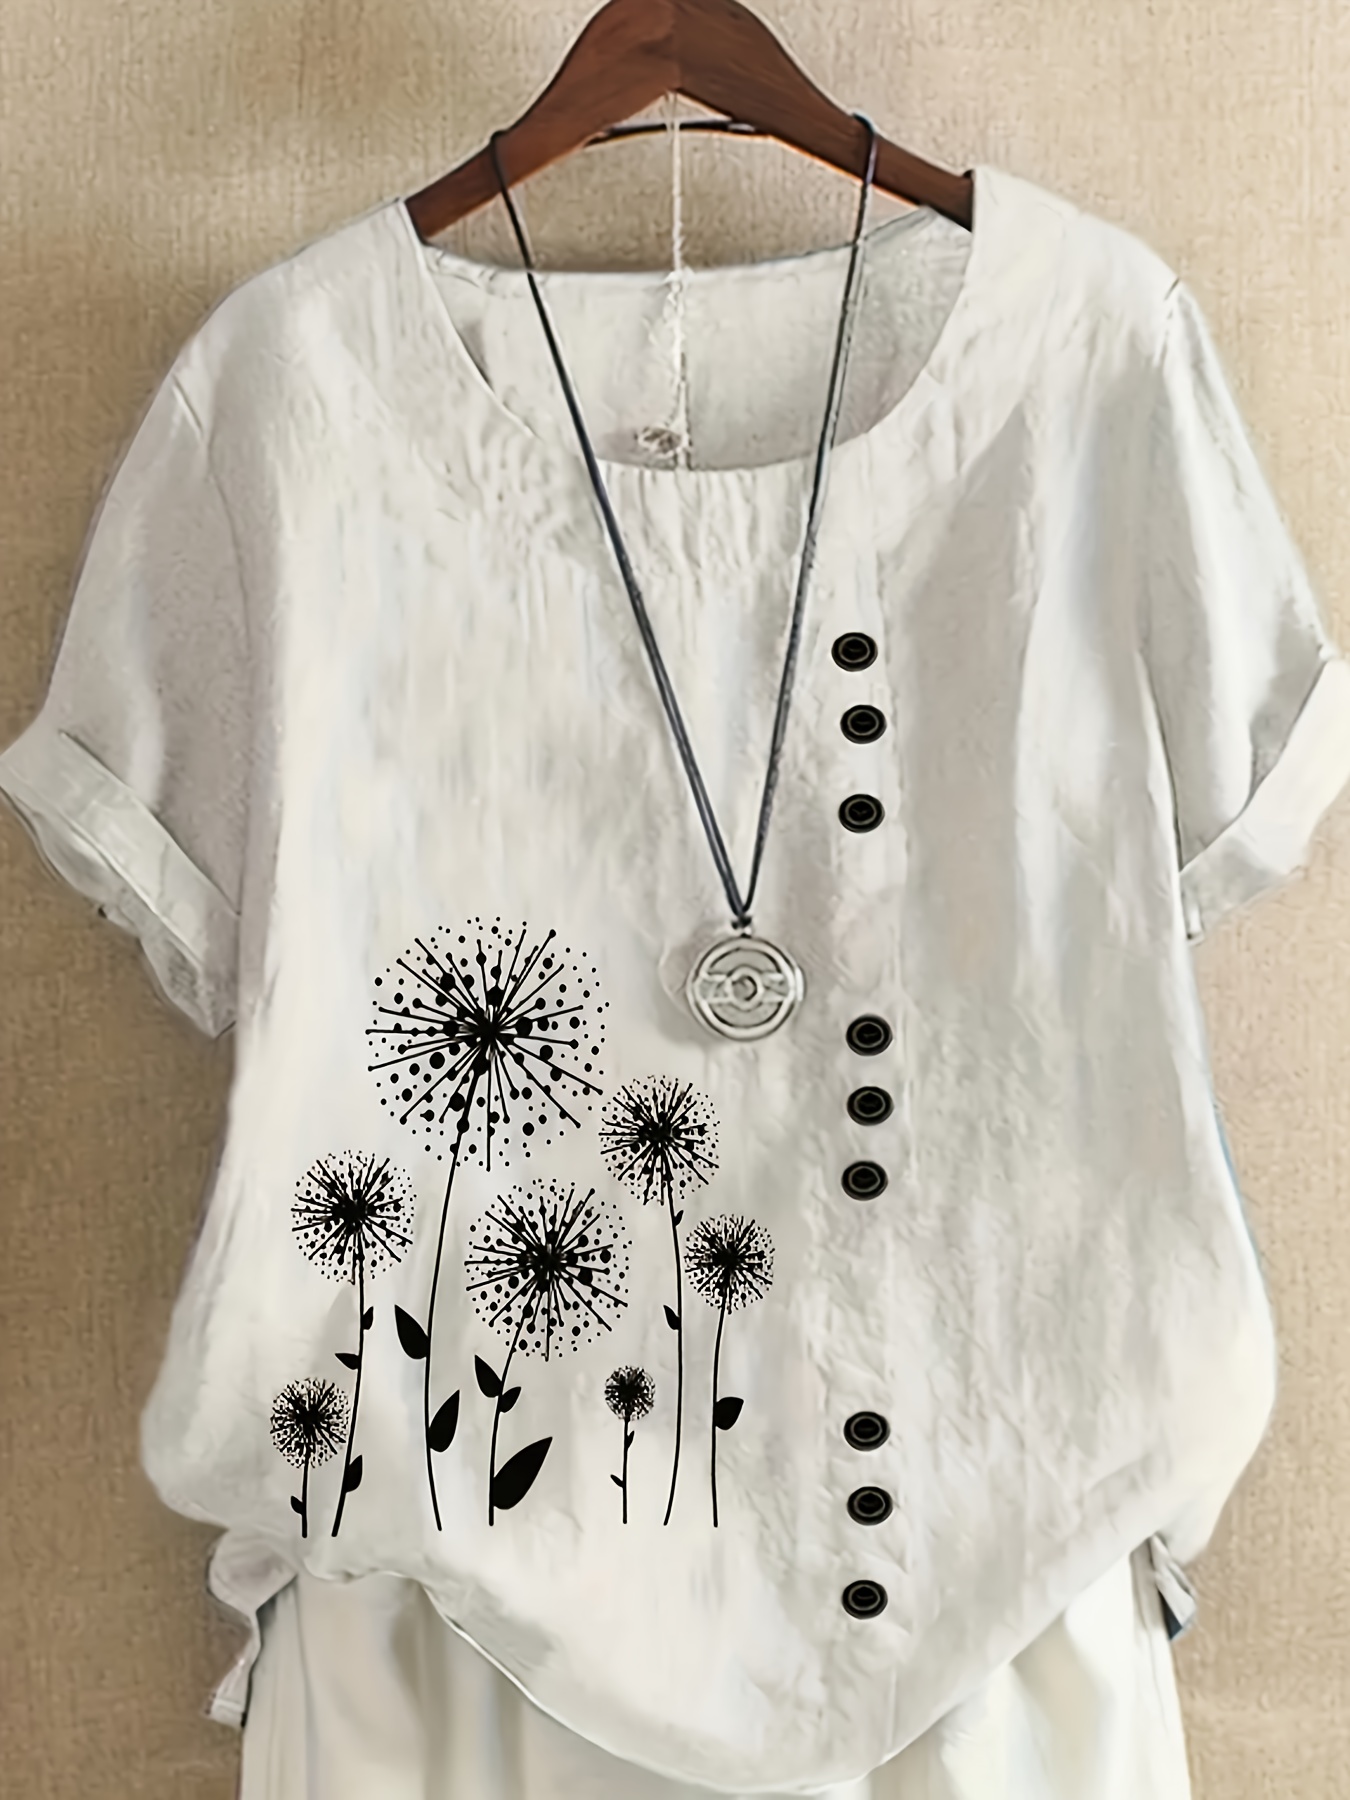 Women Linen Cotton Floral Embroidery Blouse High Low Tops Shirt Long Sleeve  Tee